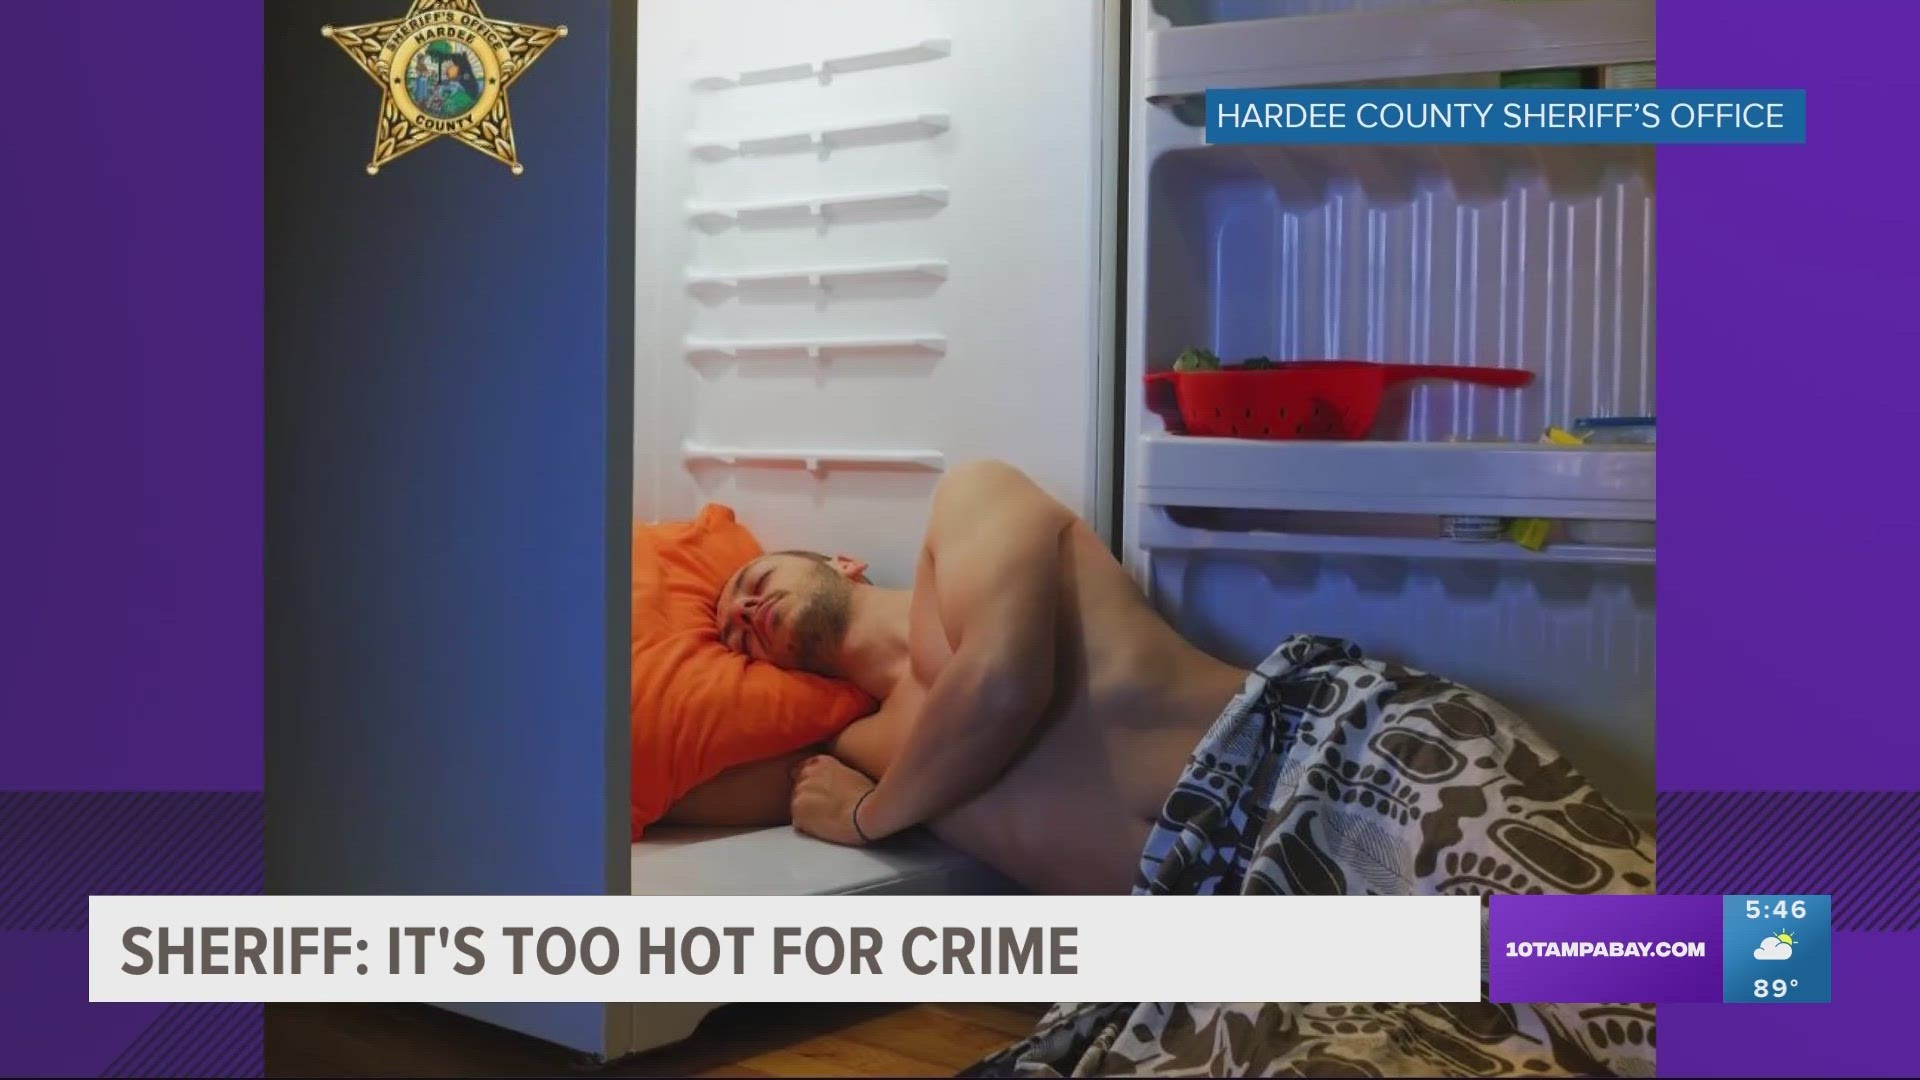 "But seriously, let’s meet again when it's cooler," the sheriff's office wrote.